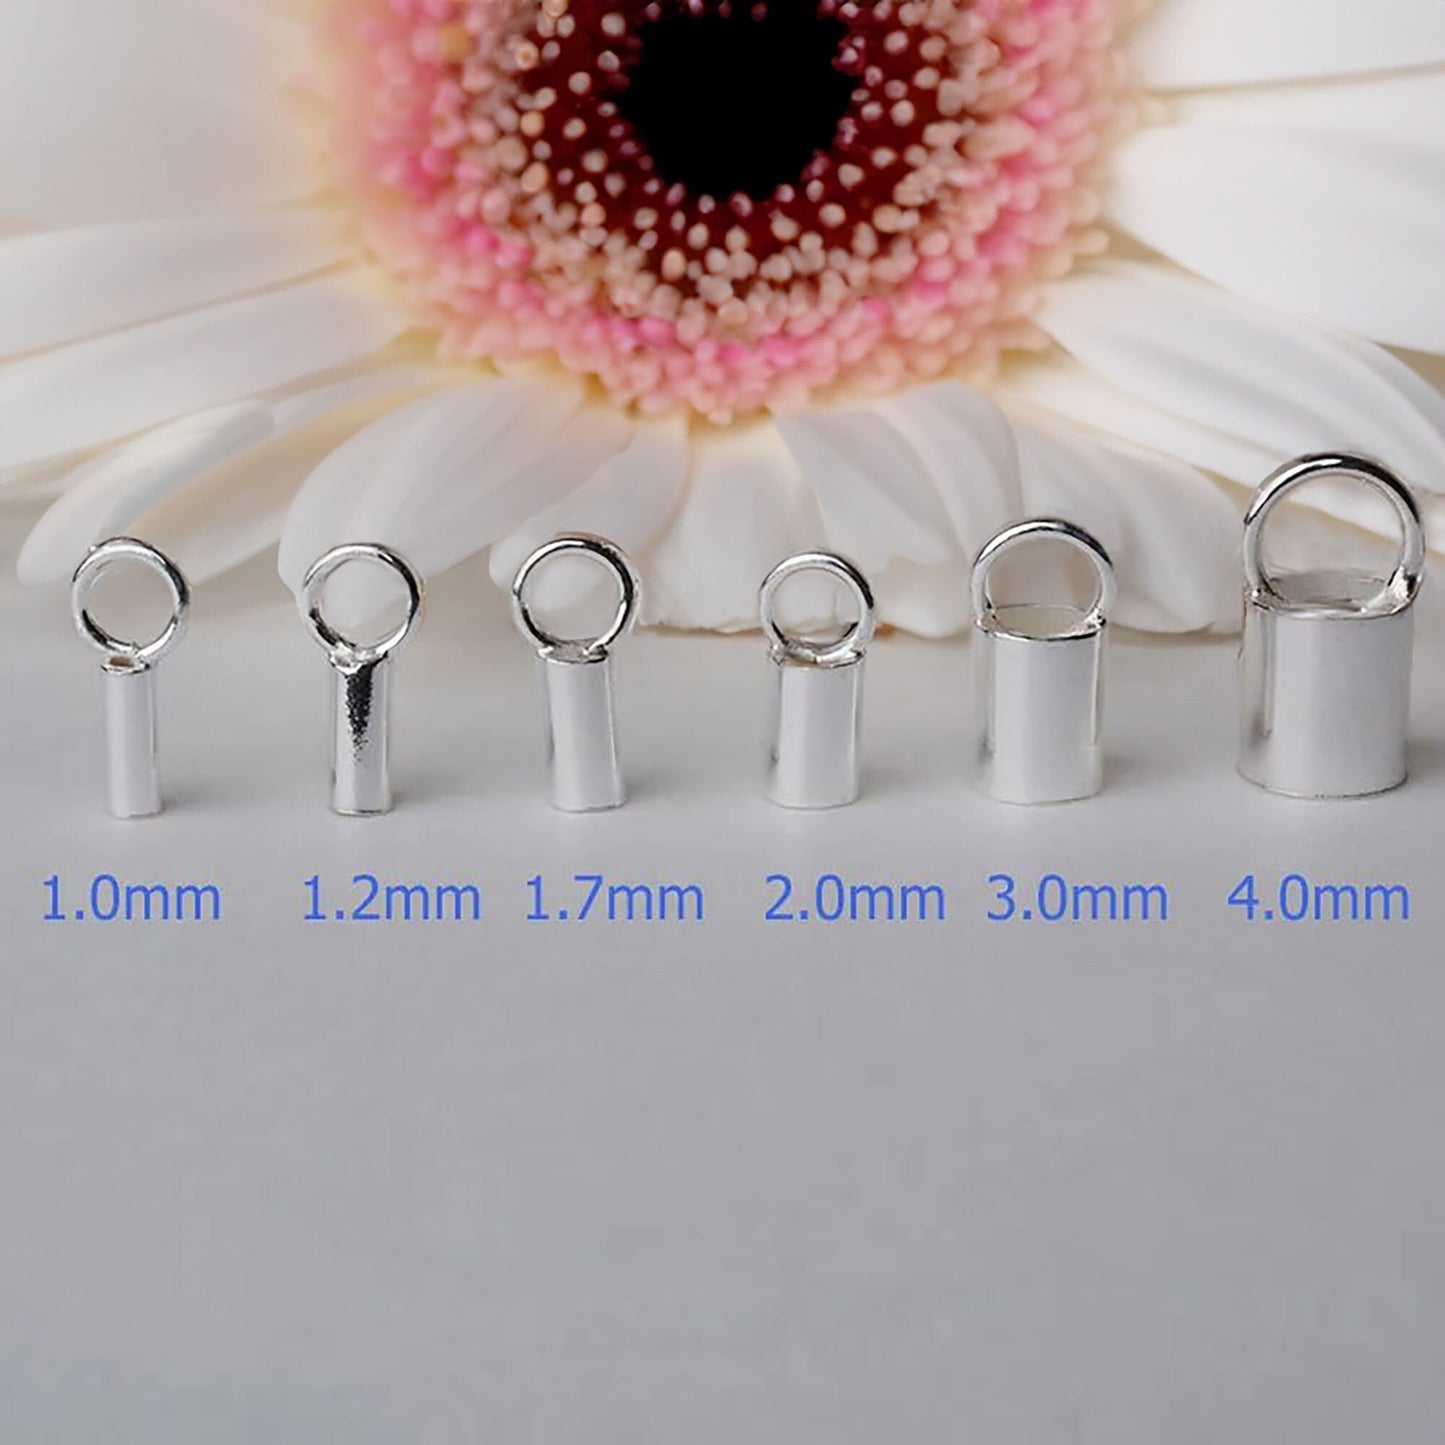 Crimp tube bead with loop, 925 sterling silver crimp ends, size from 1mm to 4mm